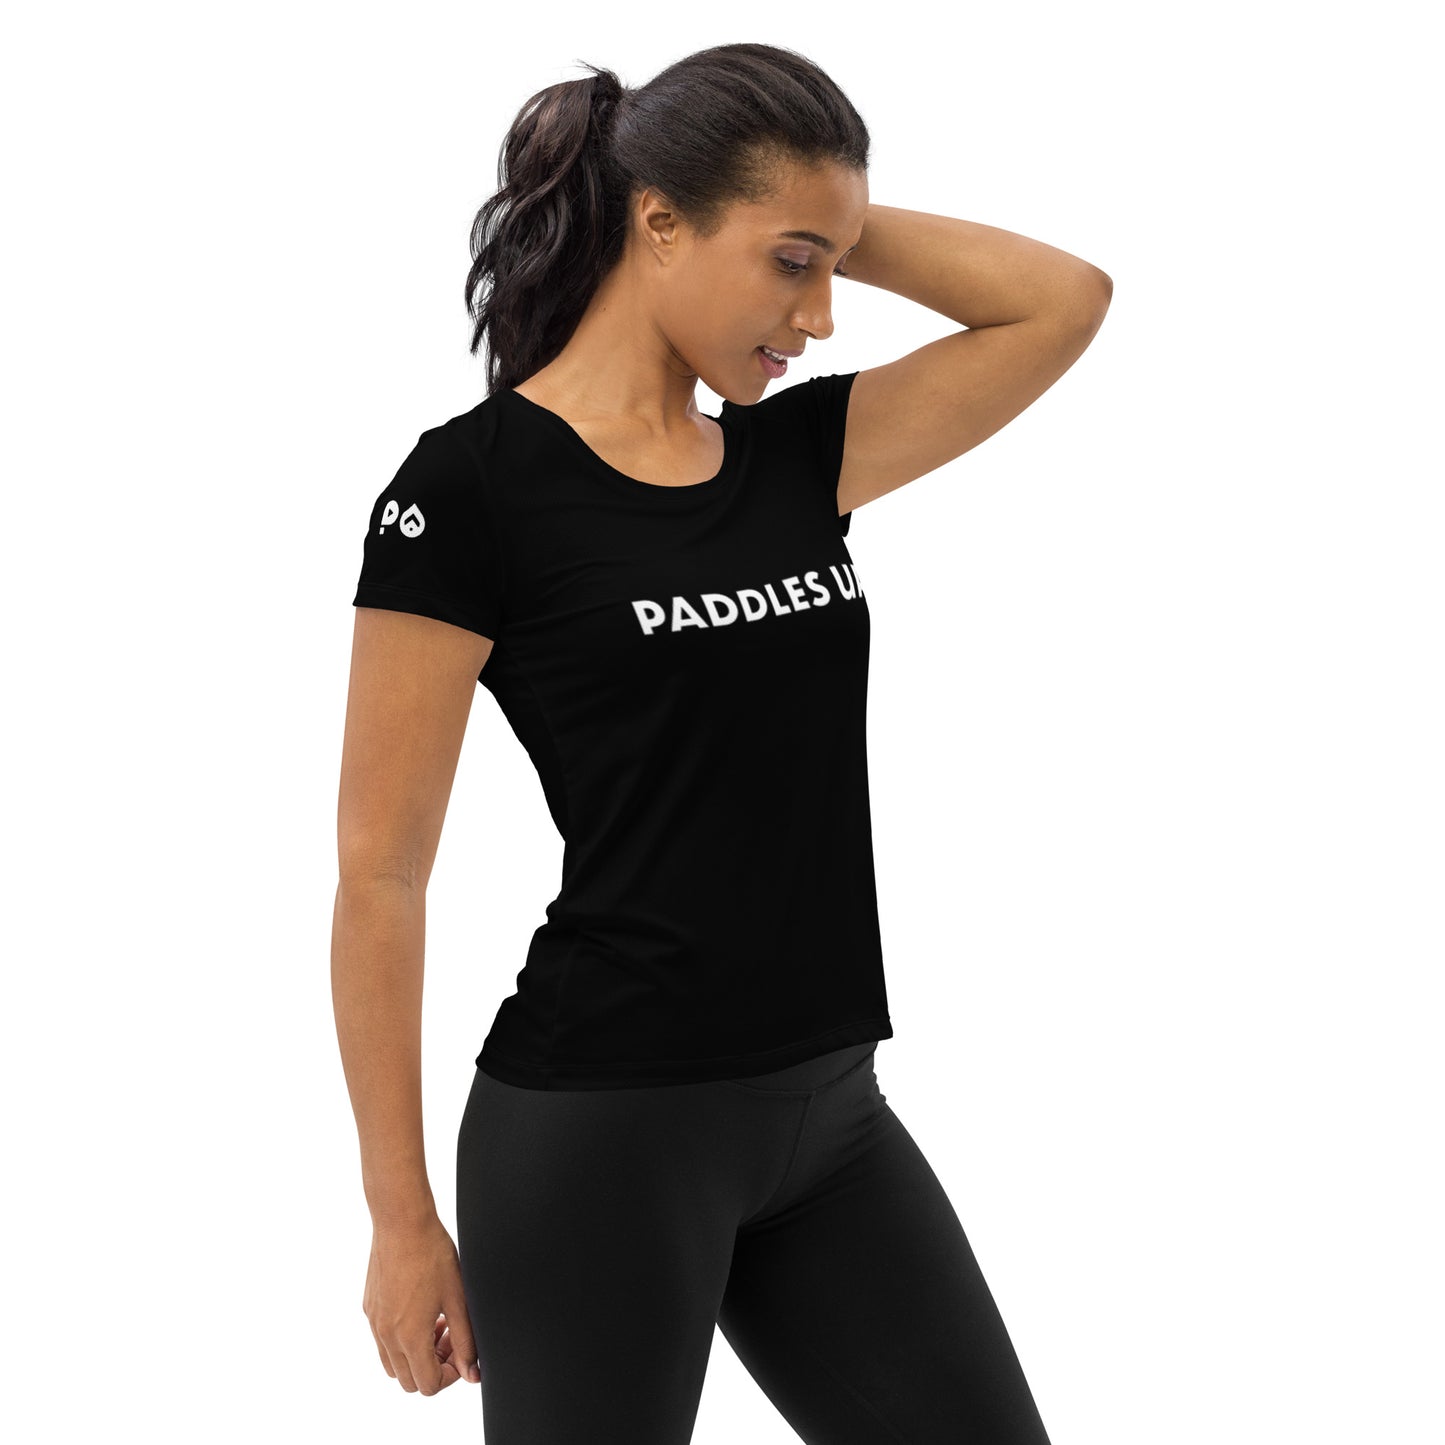 Paddle's Up Women's Athletic T-Shirt